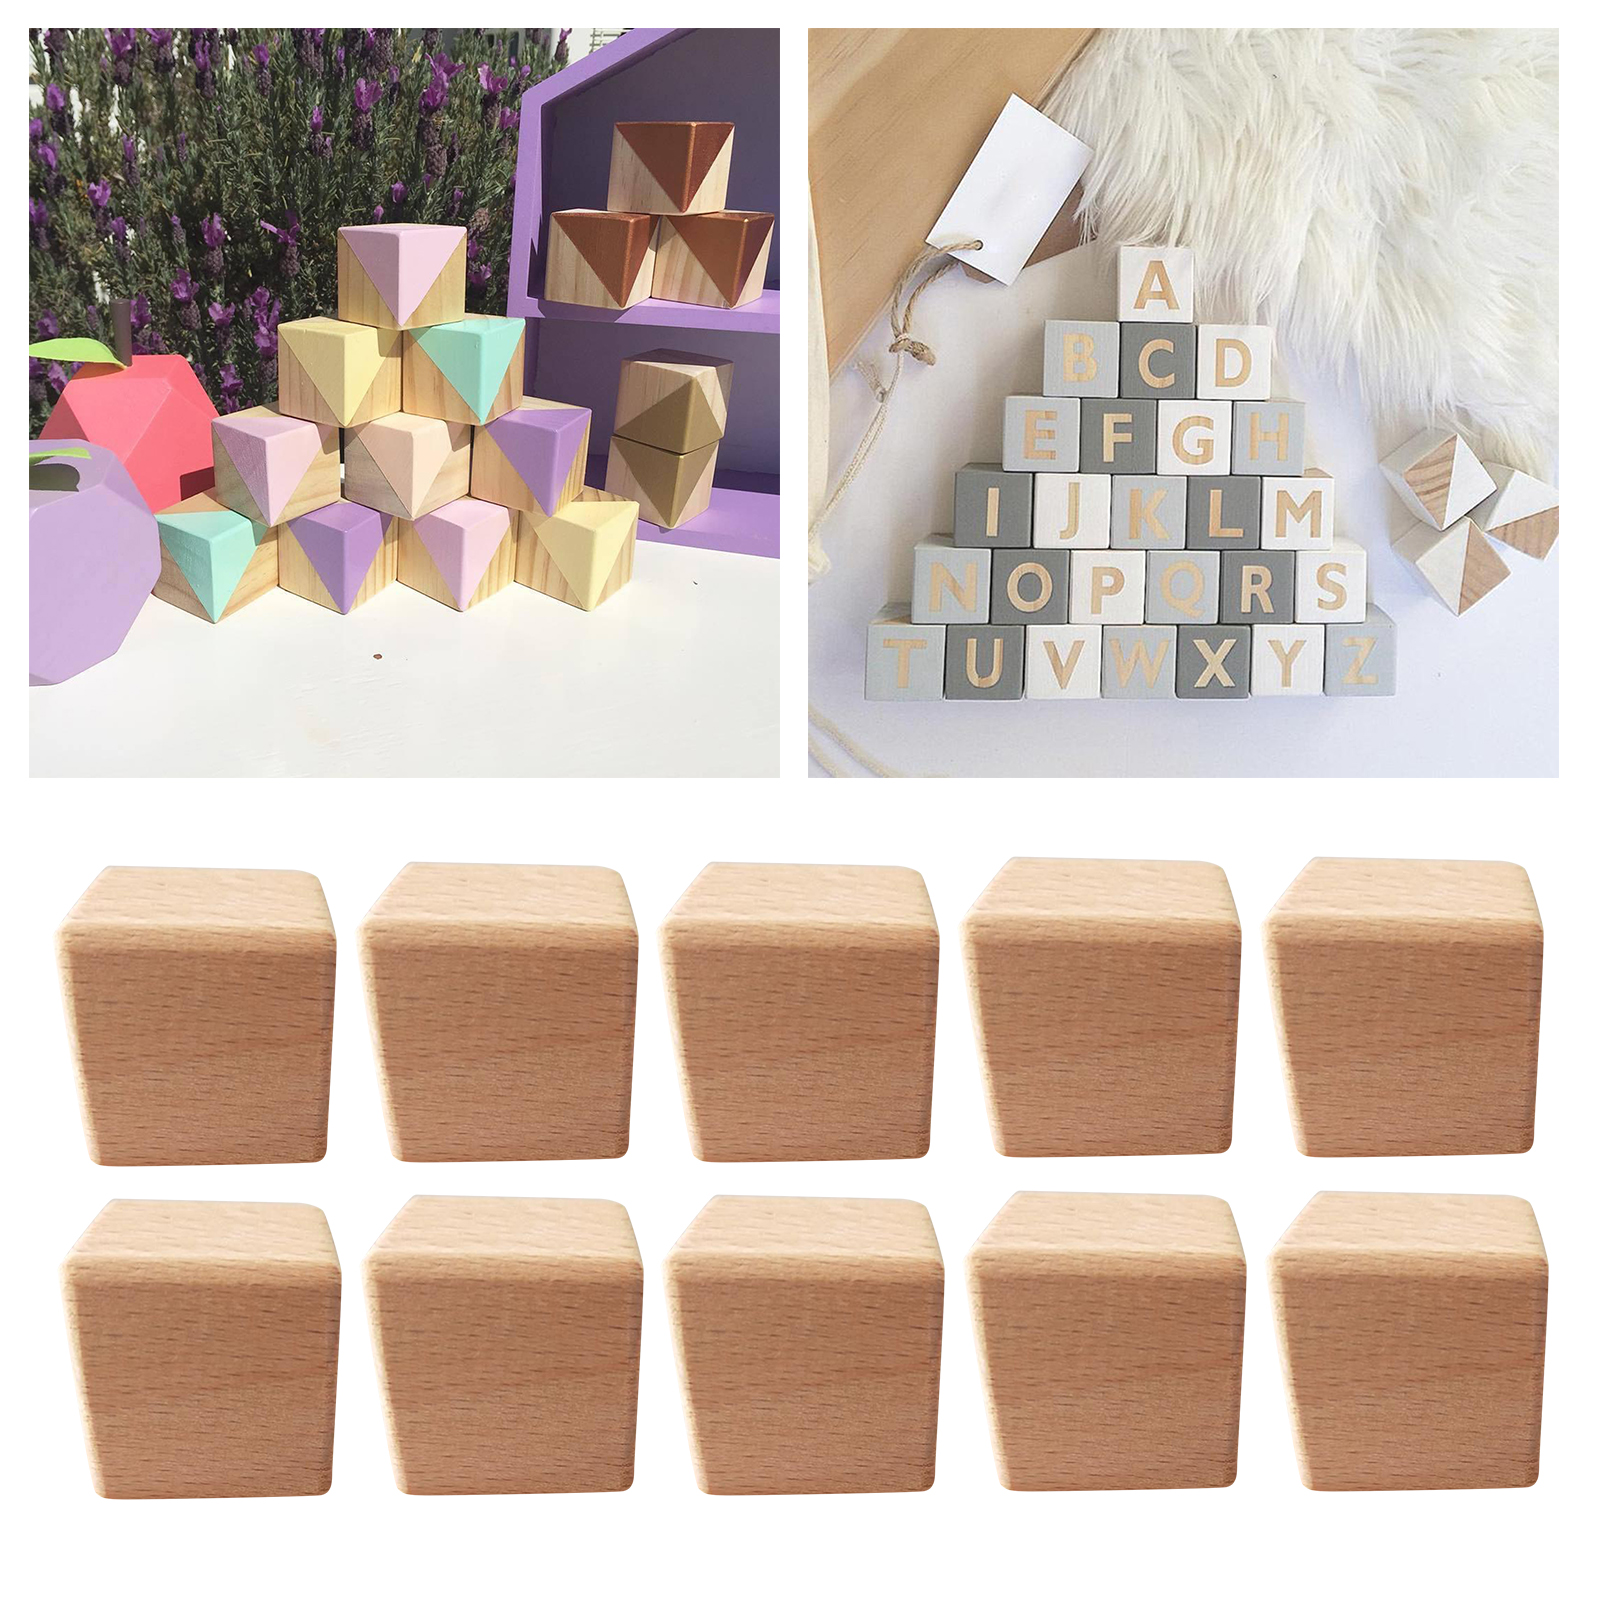 10pcs Mini Wooden Cubes Square Blocks Baby Puzzle Making Wooden Craving Painting for Crafts DIY Projects Kids Hobbies Toys